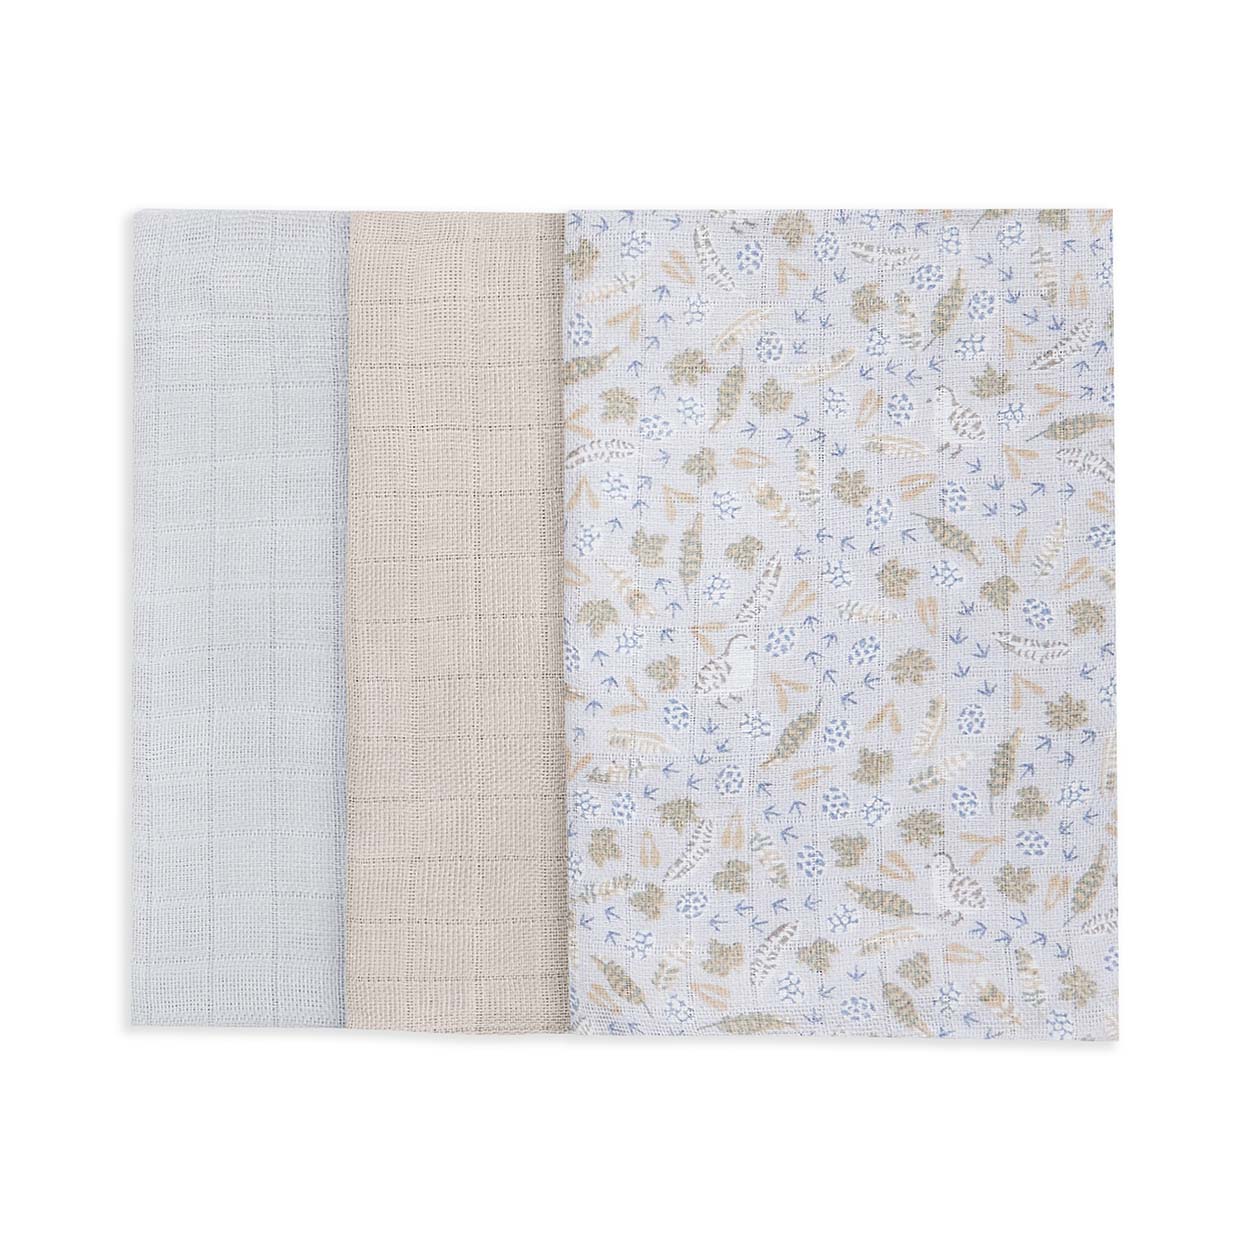 Avery Row Organic Baby Muslin Squares Set of 3 - Nature Trail